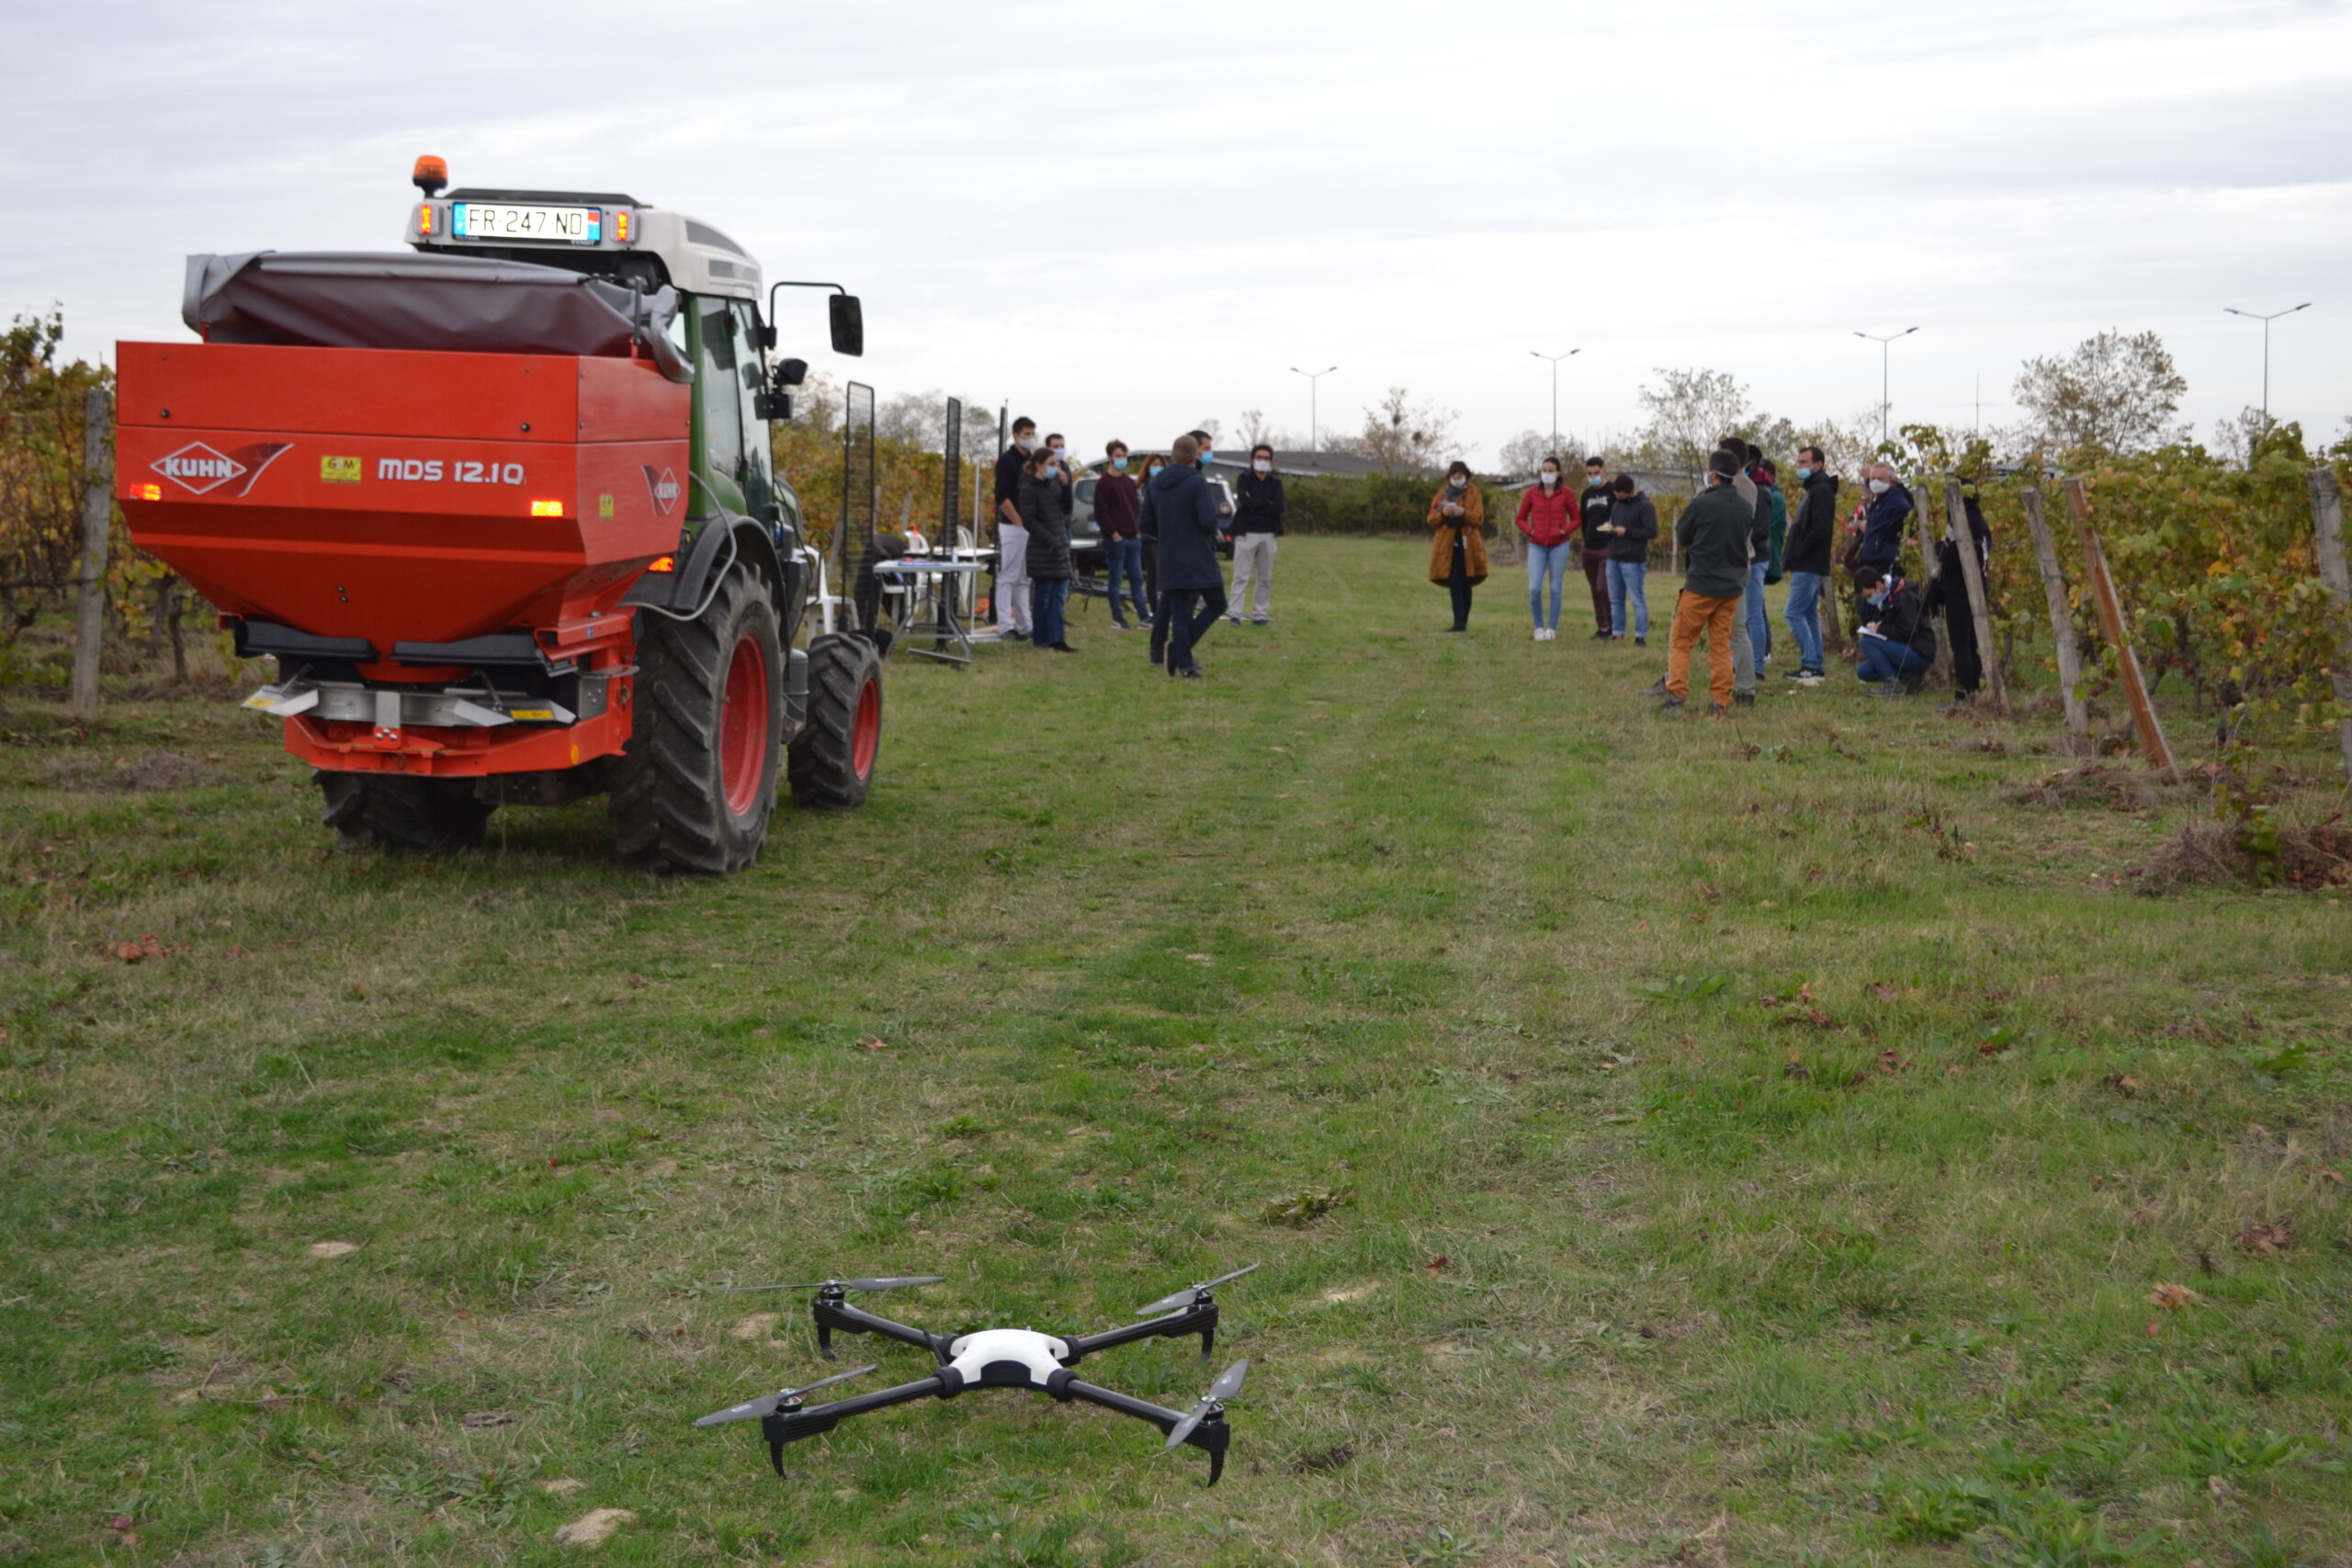 Field demonstration of auto guidance equipment and precision farming in the vineyard